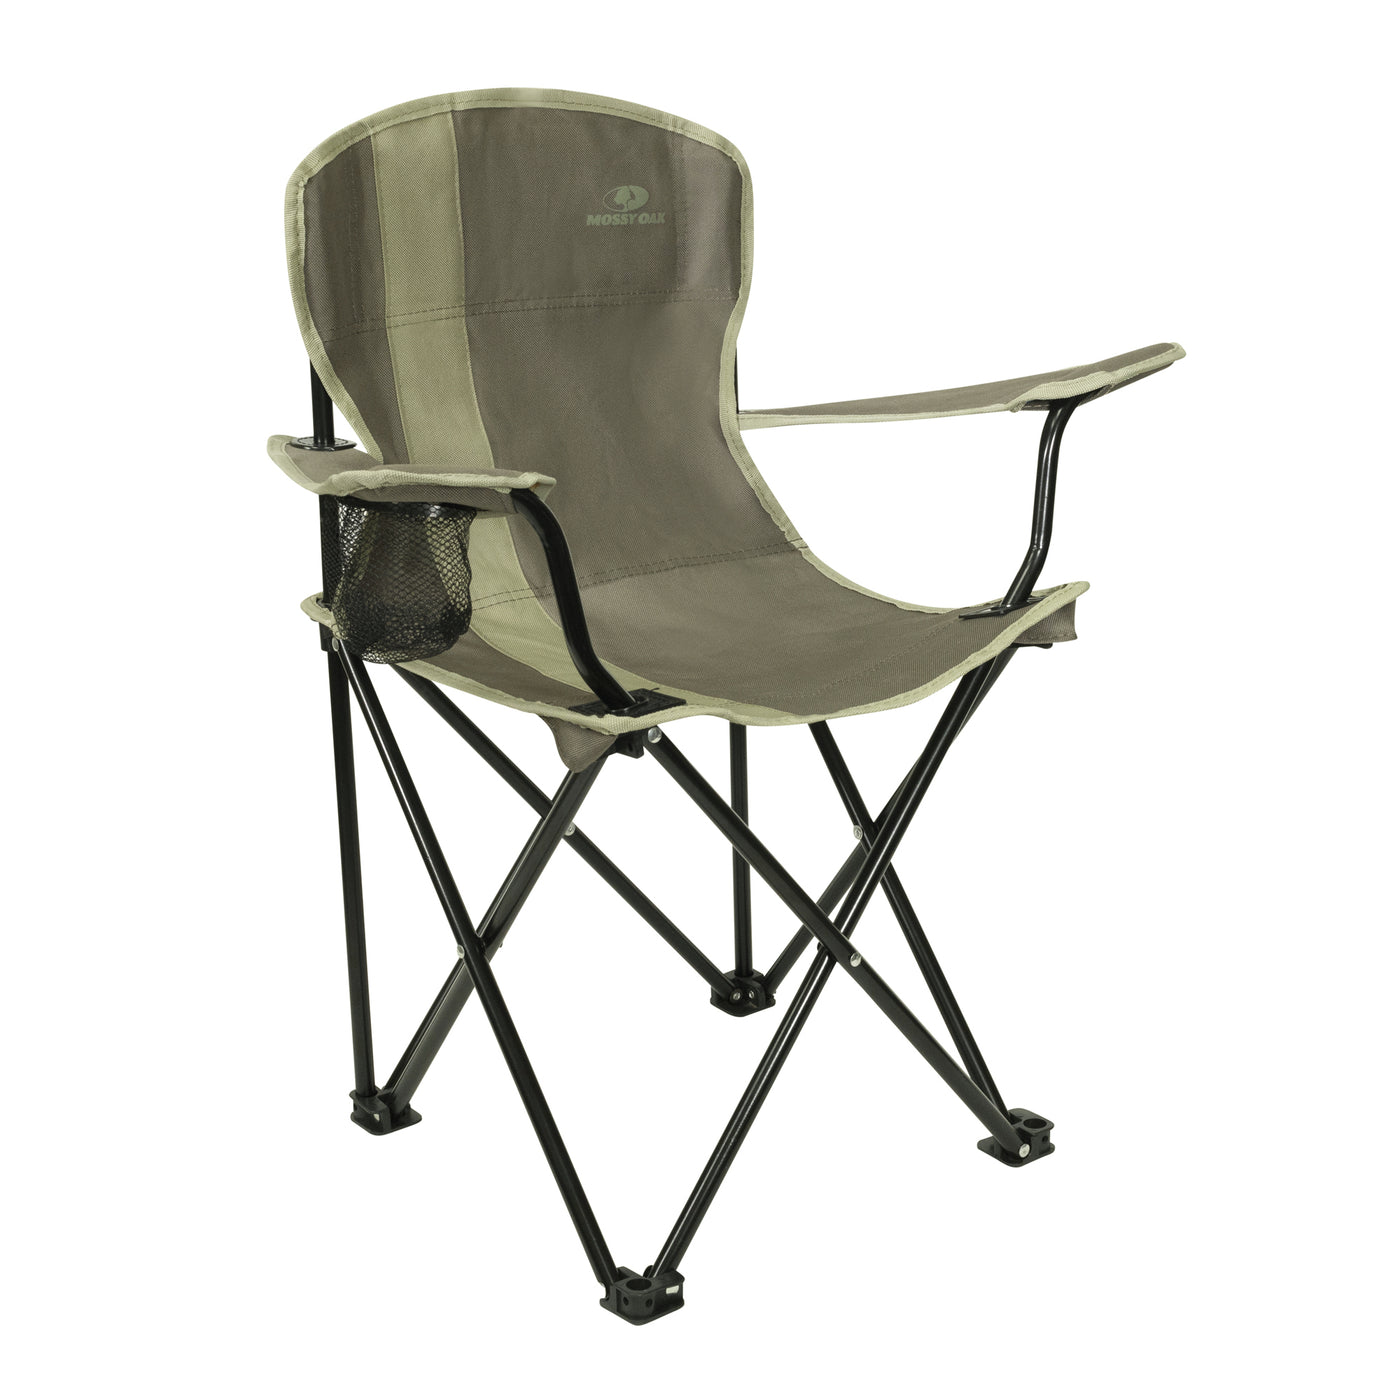 Mossy Oak Deluxe Youth Camp Chair